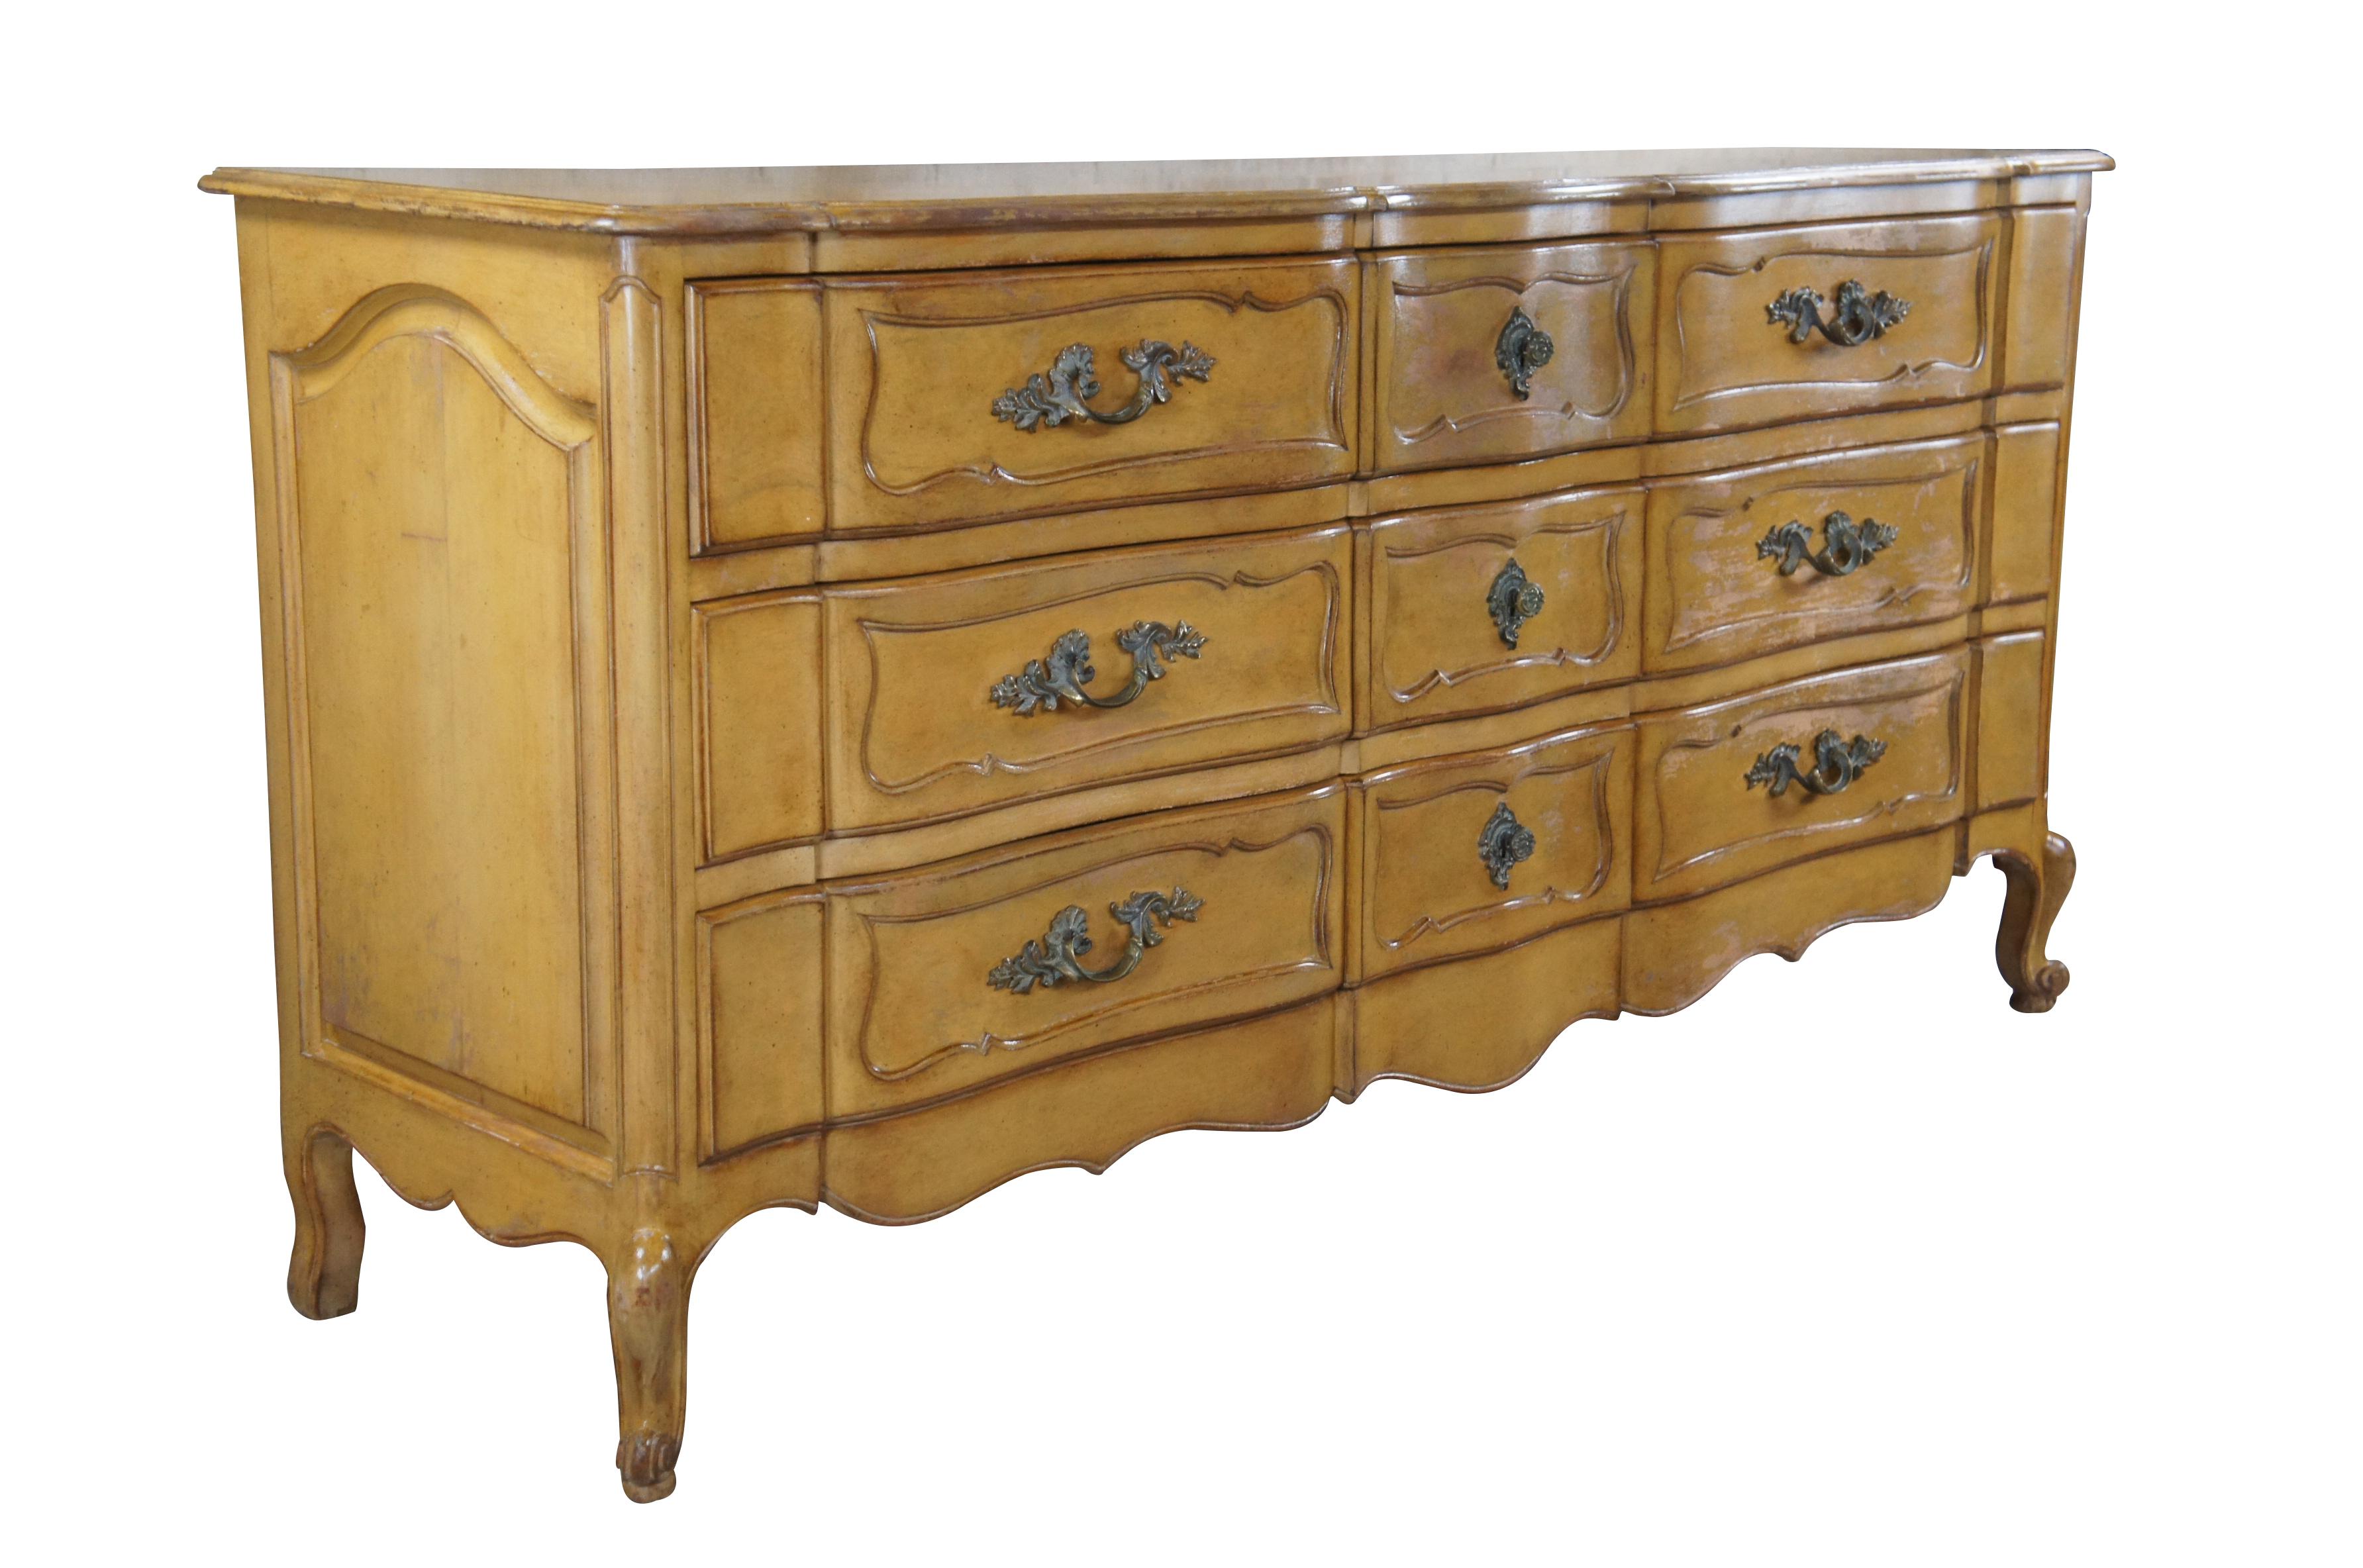 A stout mid century French Provincial dresser featuring serpentine form with nine dovetailed oak drawers, paneled accents and cabriole legs. Attributed to Bethlehem Furniture Co.

Dimensions:
21